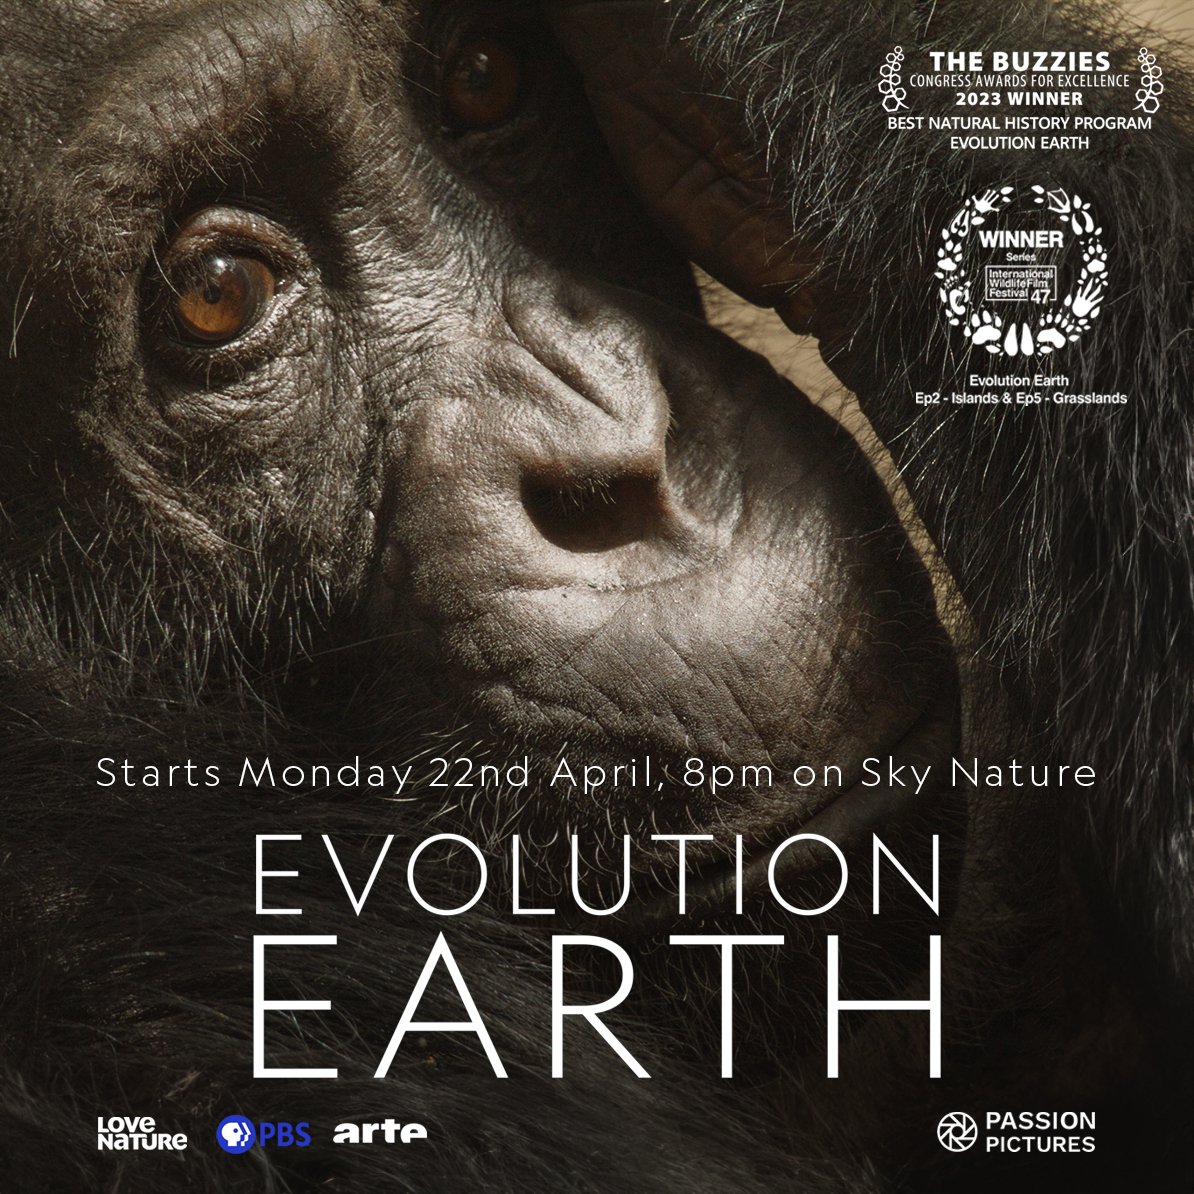 I had the absolute privilege of directing a shoot for #EvolutionEarth filming these remarkable great apes with the equally amazing @JillPruetz. Very important & special group of primates that show us a rare glimpse into our own species evolution #EarthDay2024.Out today! #chimps🐵